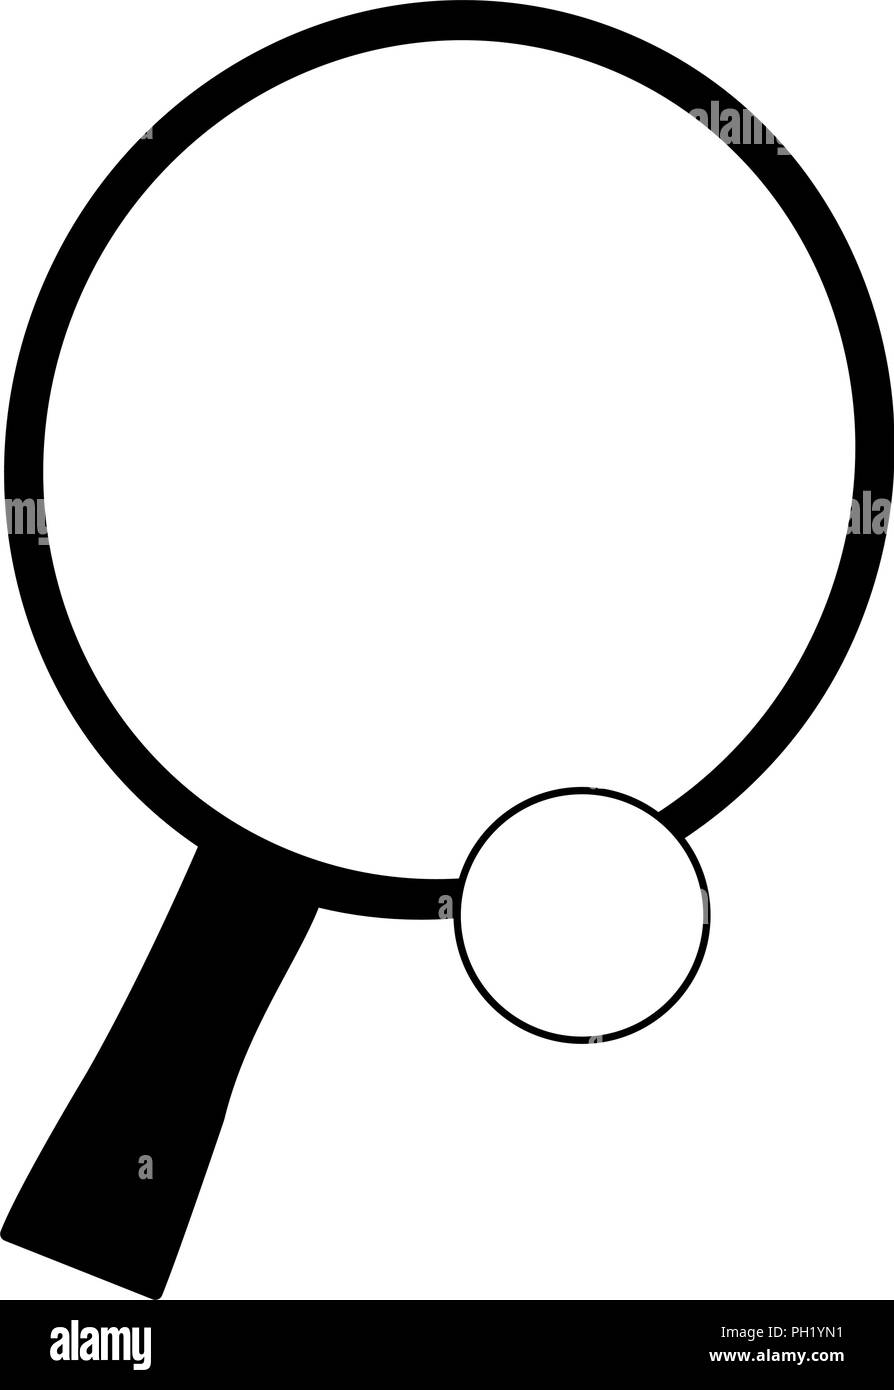 Ping pong racket and ball in black and white Stock Vector